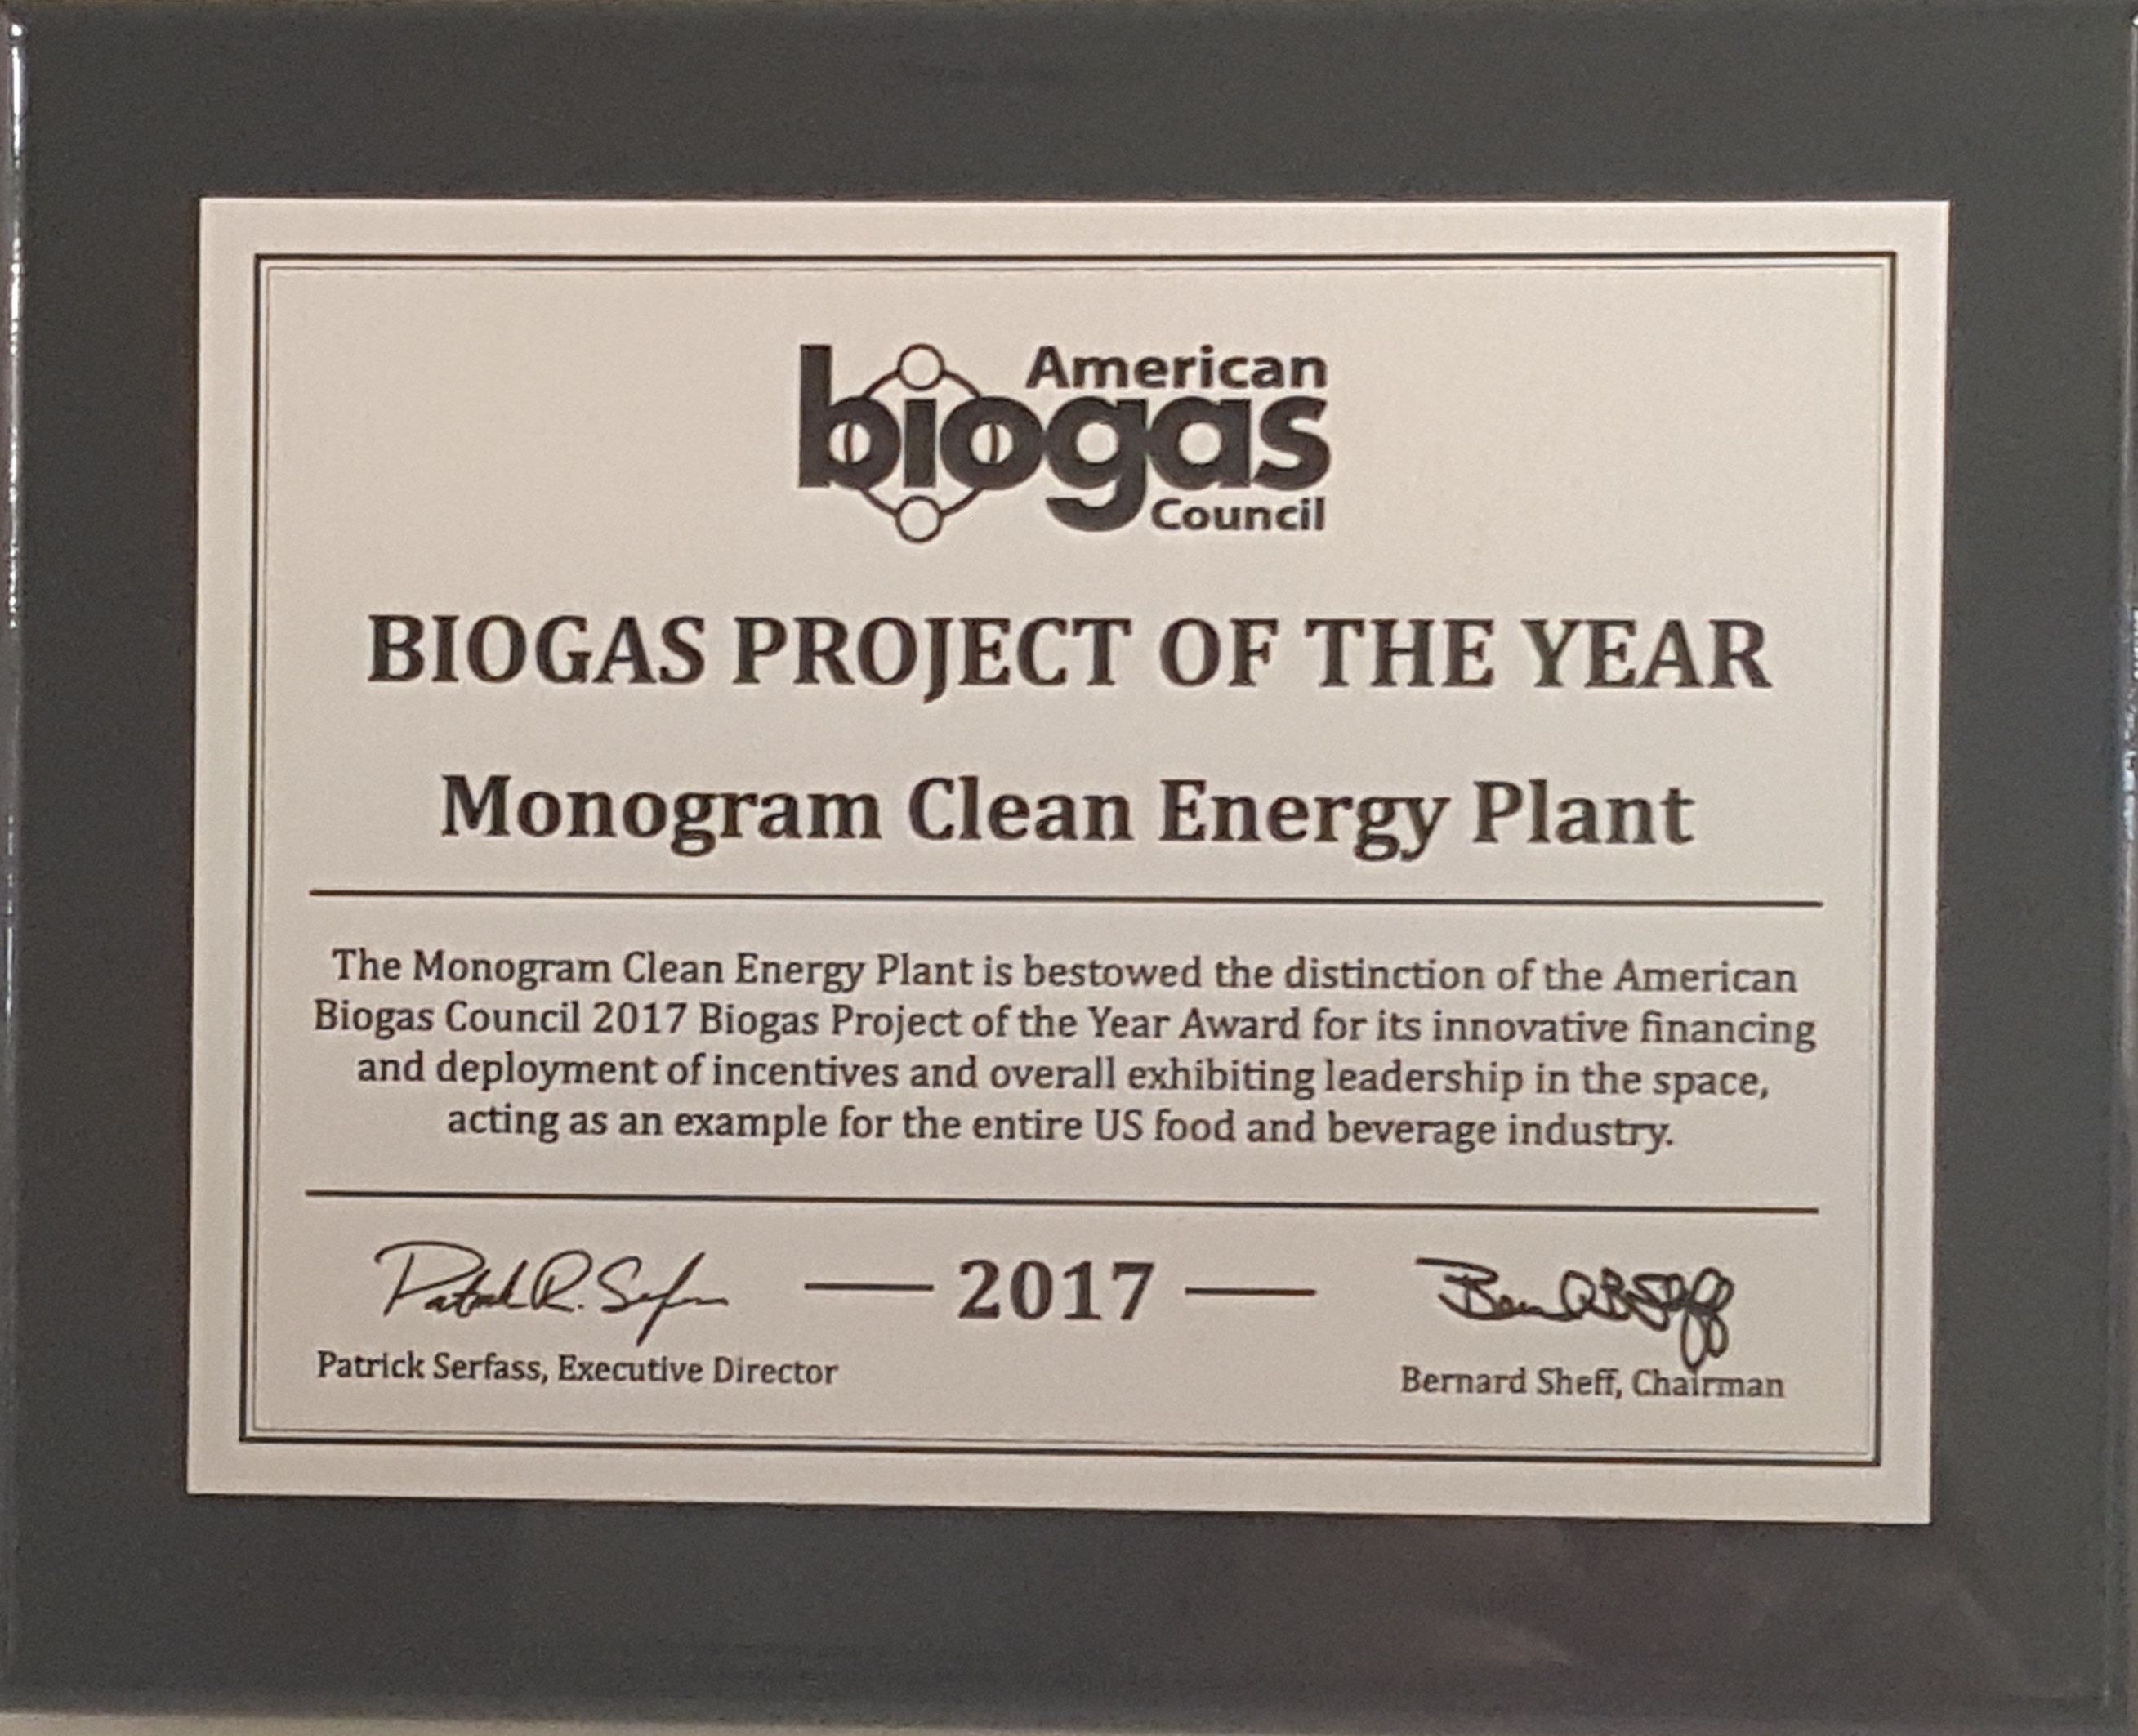 Biogas Project of the Year Award